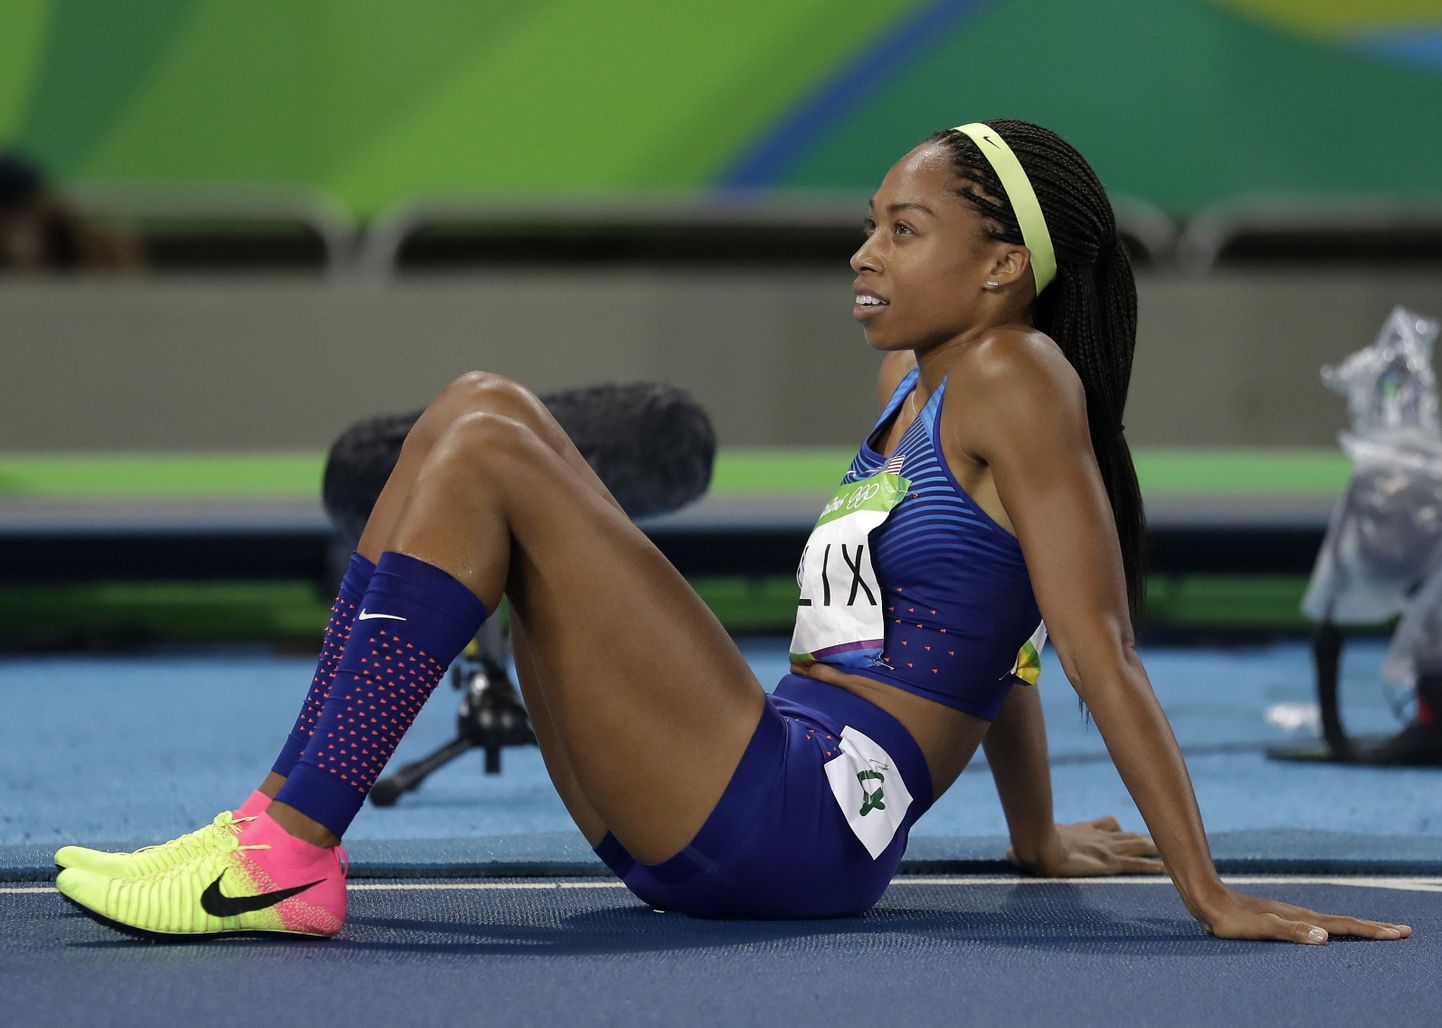 Silver medal winner, United States' Allyson Felix after the women's 400-meter final, during the athletics competitions of the 2016 Summer Olympics at the Olympic stadium in Rio de Janeiro, Brazil, Monday, Aug. 15, 2016. (AP Photo/Matt Dunham)